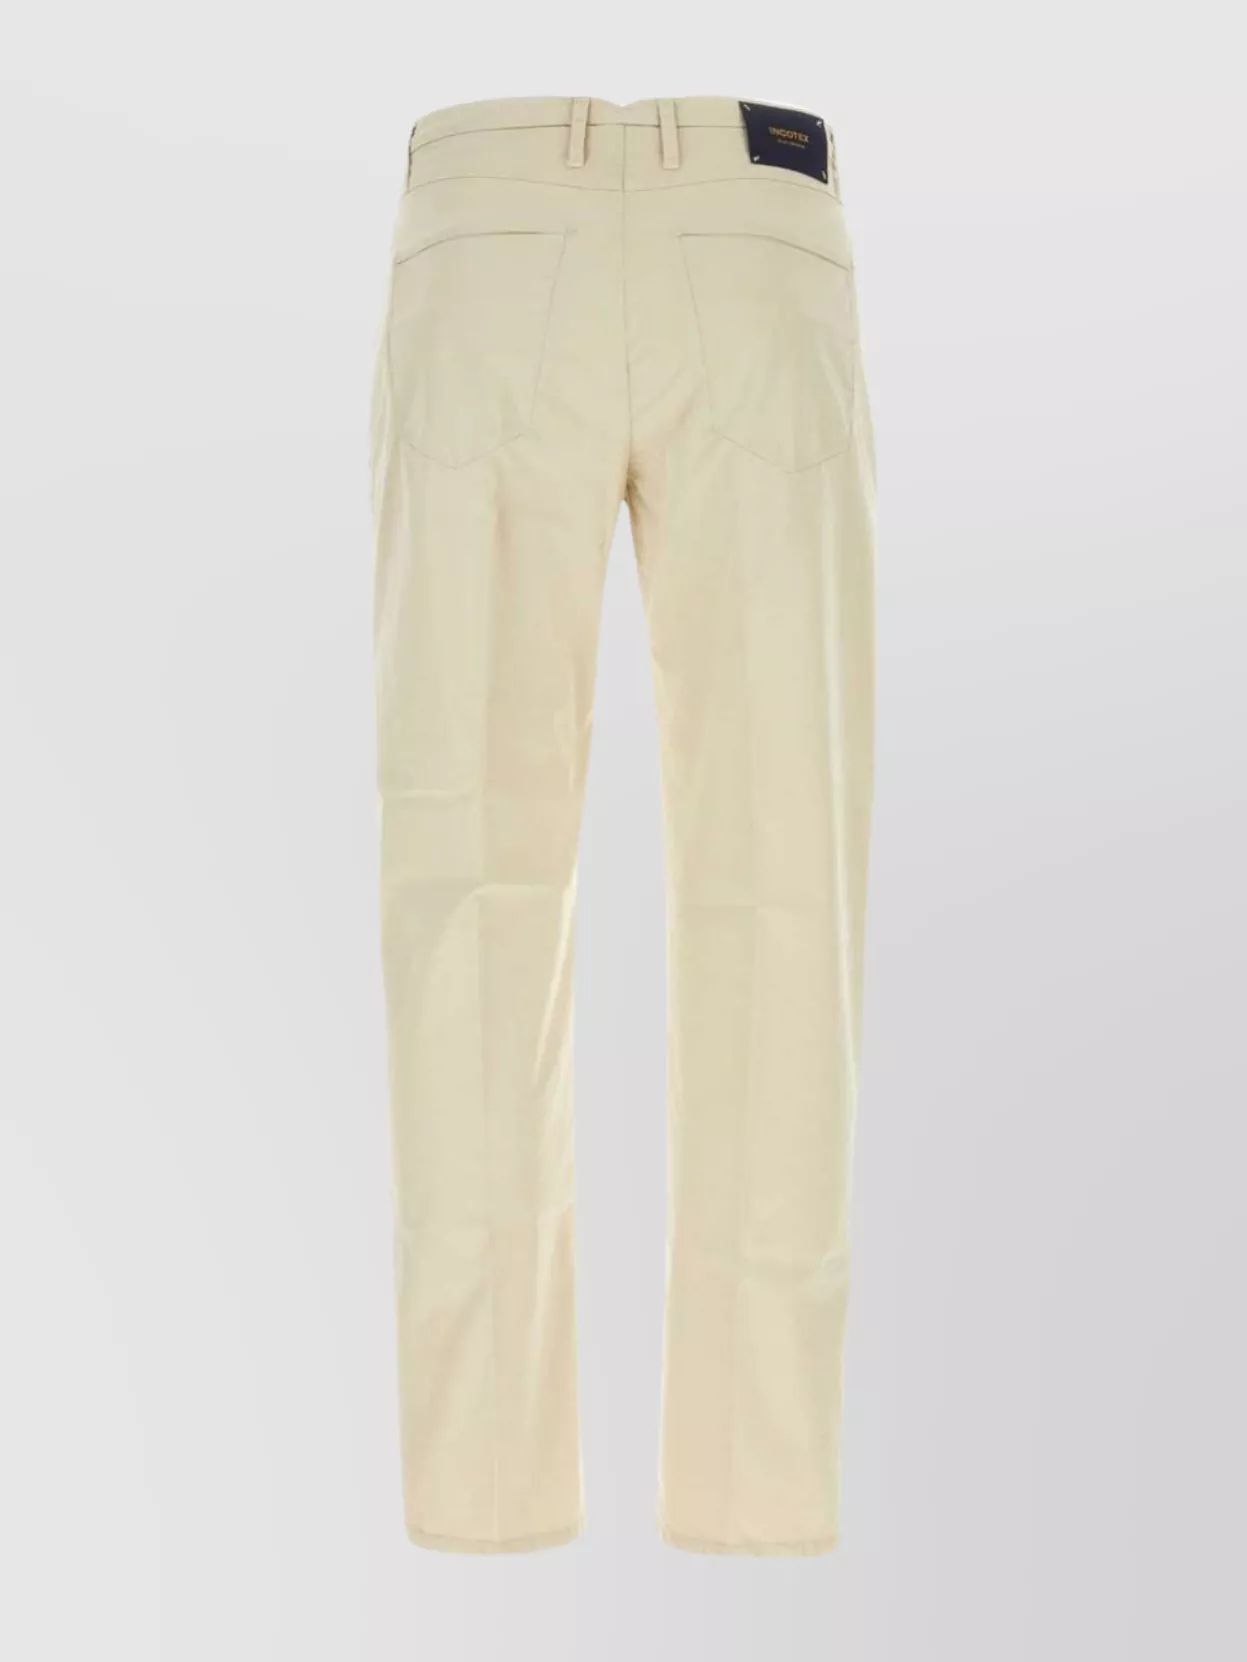 Shop Incotex Cotton Trousers With Back Pockets And Belt Loops